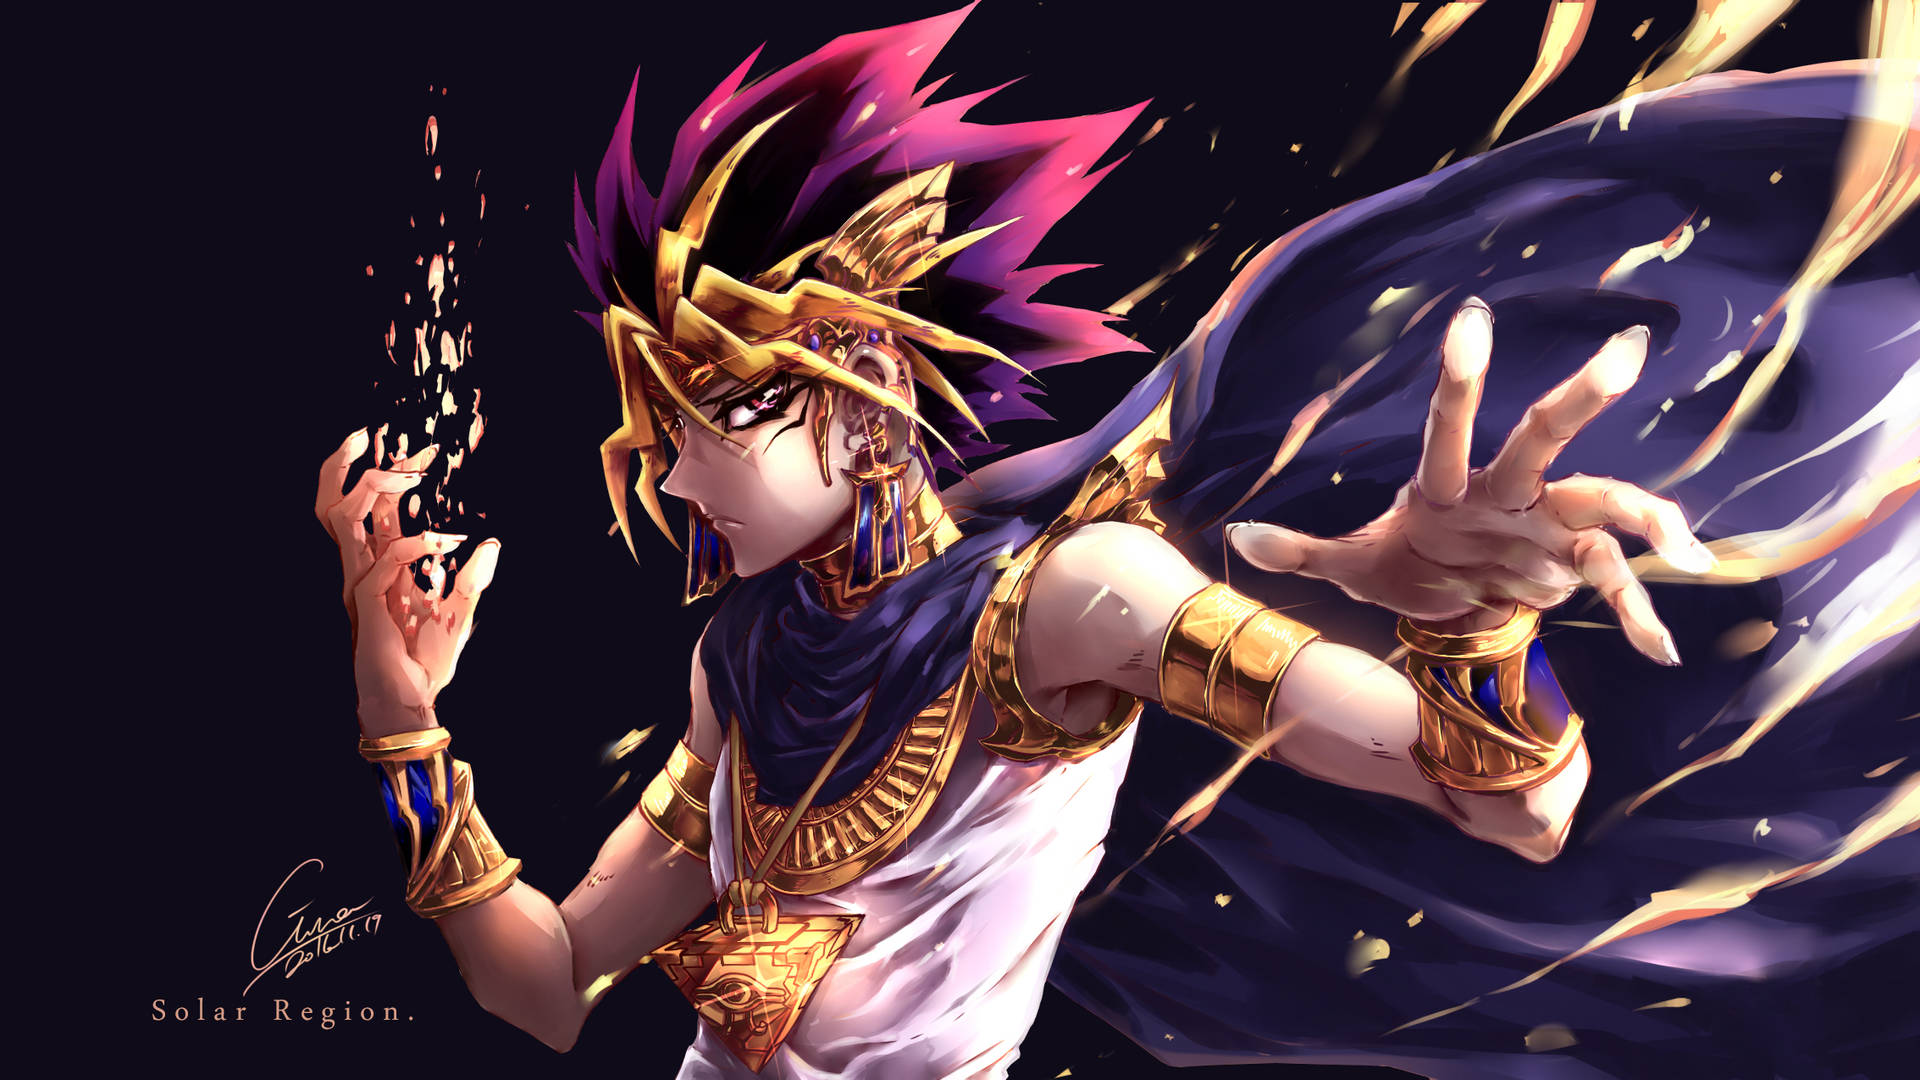 Top 999+ Yugioh Wallpaper Full HD, 4K Free to Use